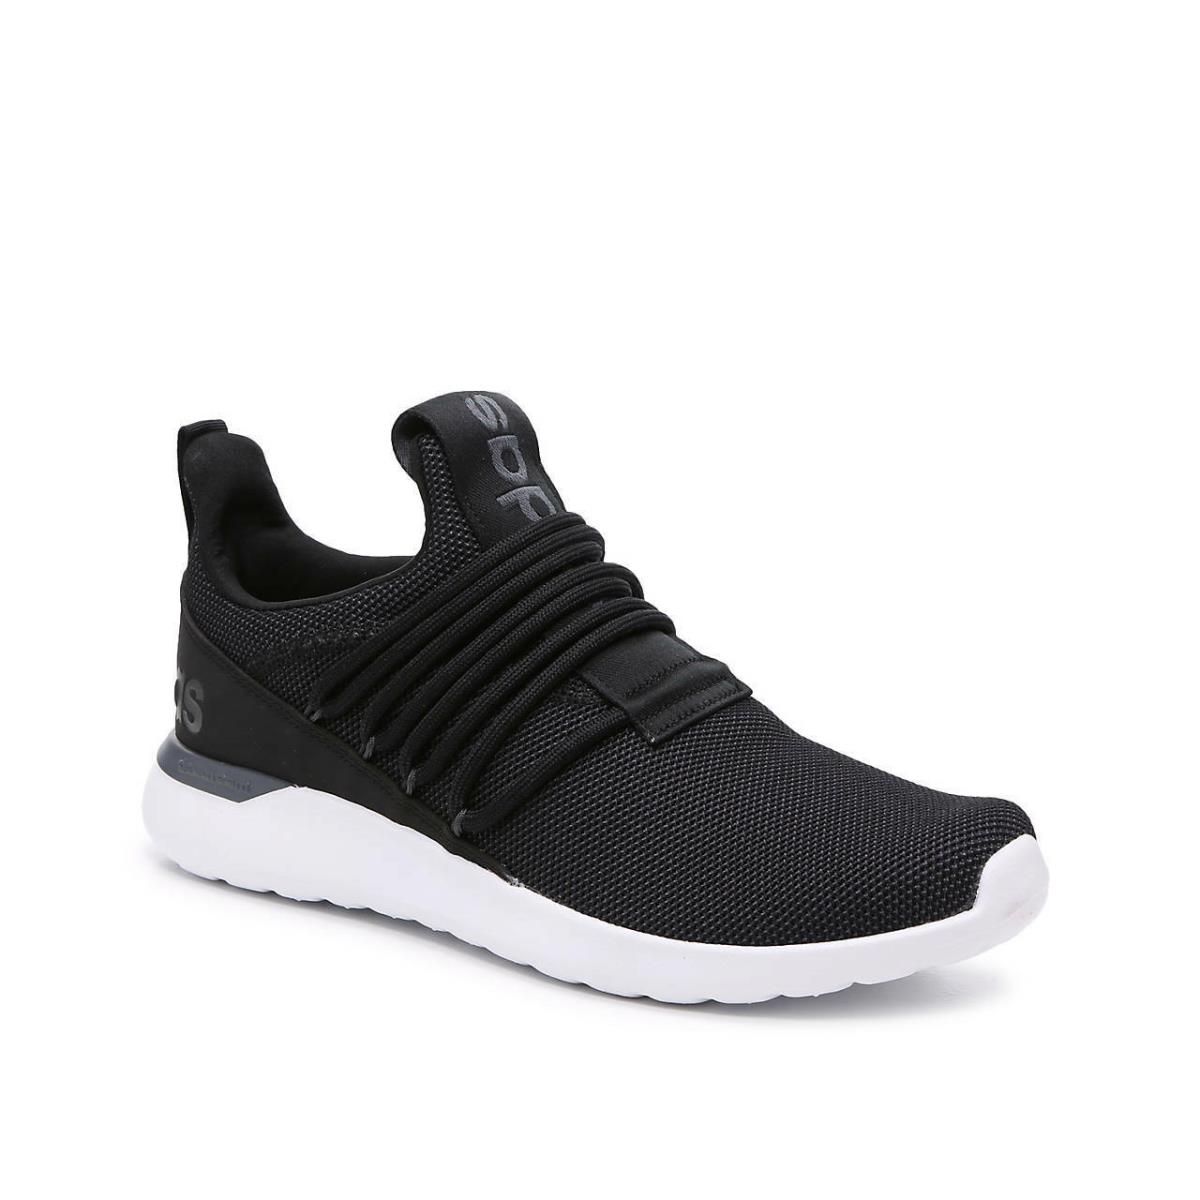 Adidas shoes LITE RACER ADAPT 2